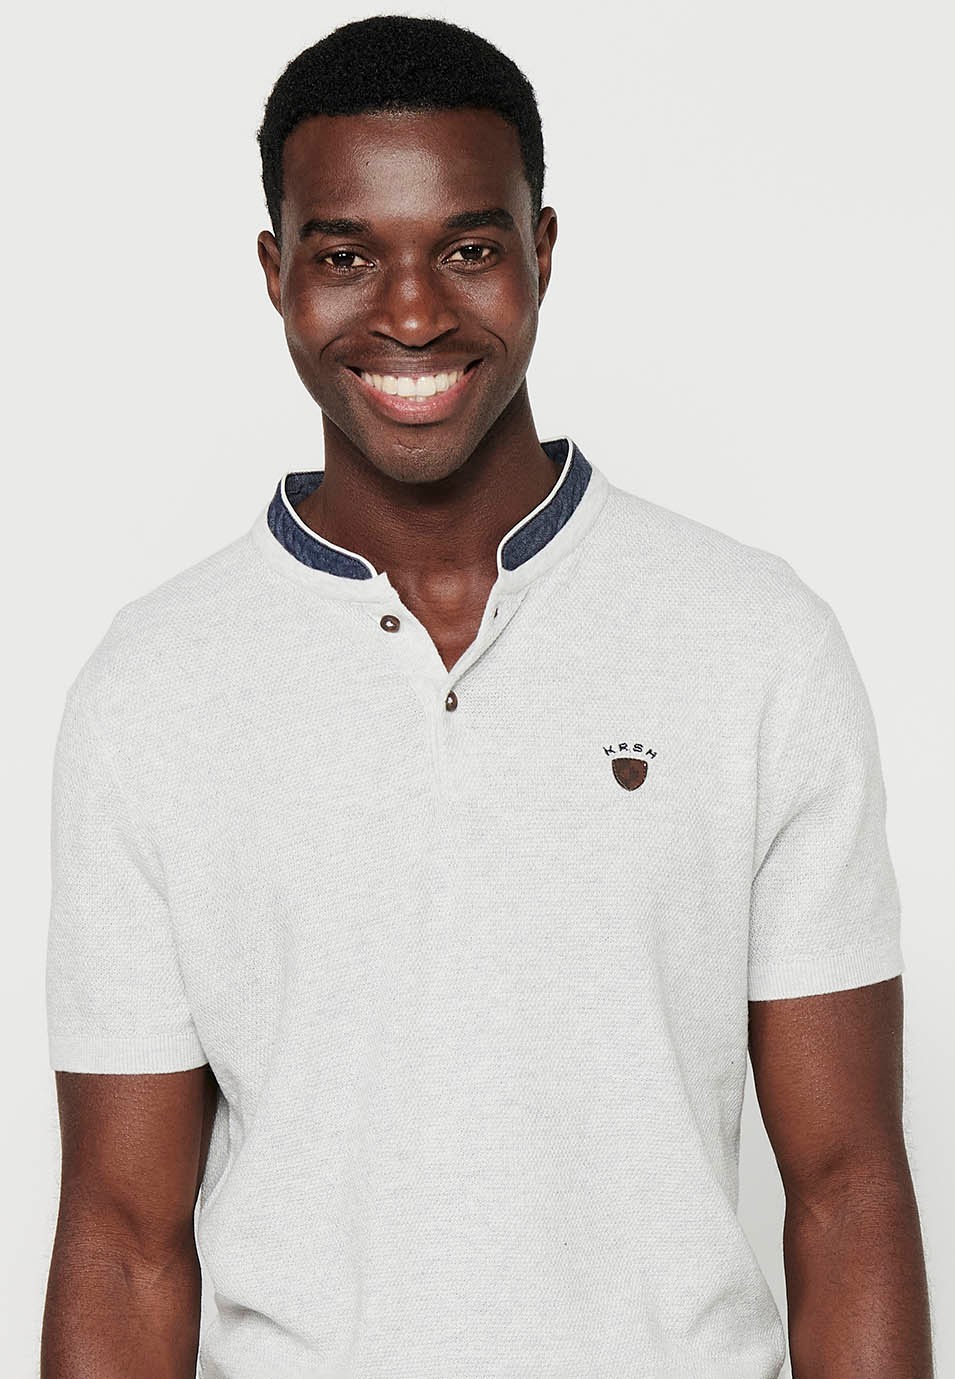 Short Sleeve Cotton Polo Shirt with Round Neck with Buttoned Opening and Textured Navy Color for Men 7